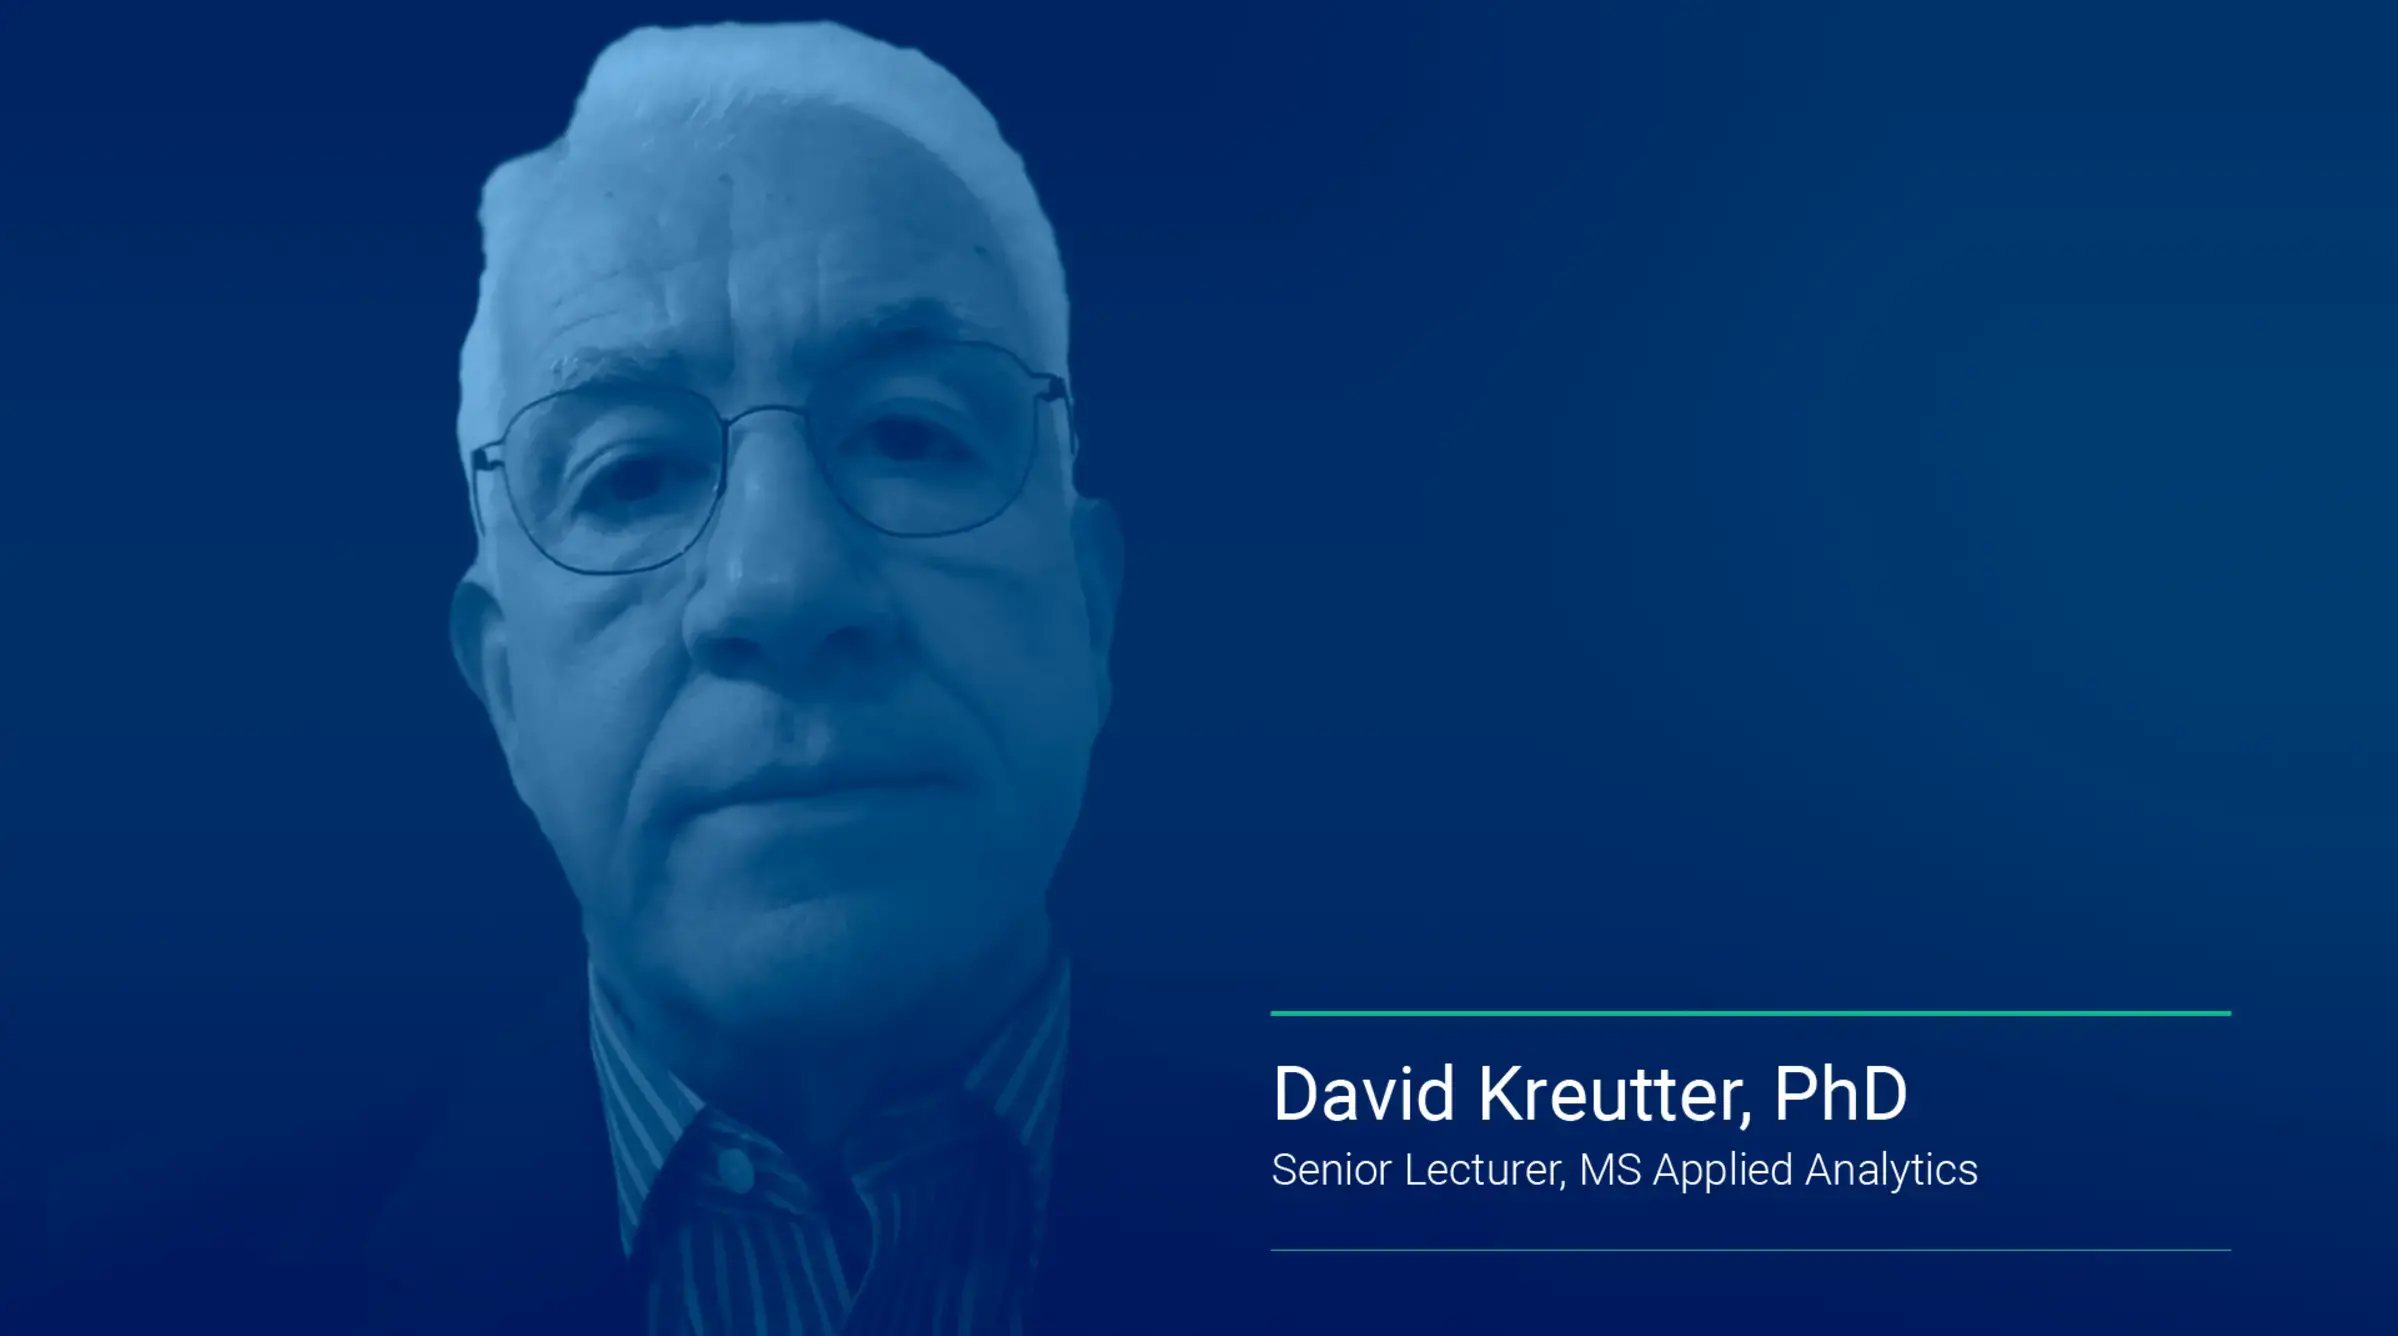 David Kreutter exciting time in analytics